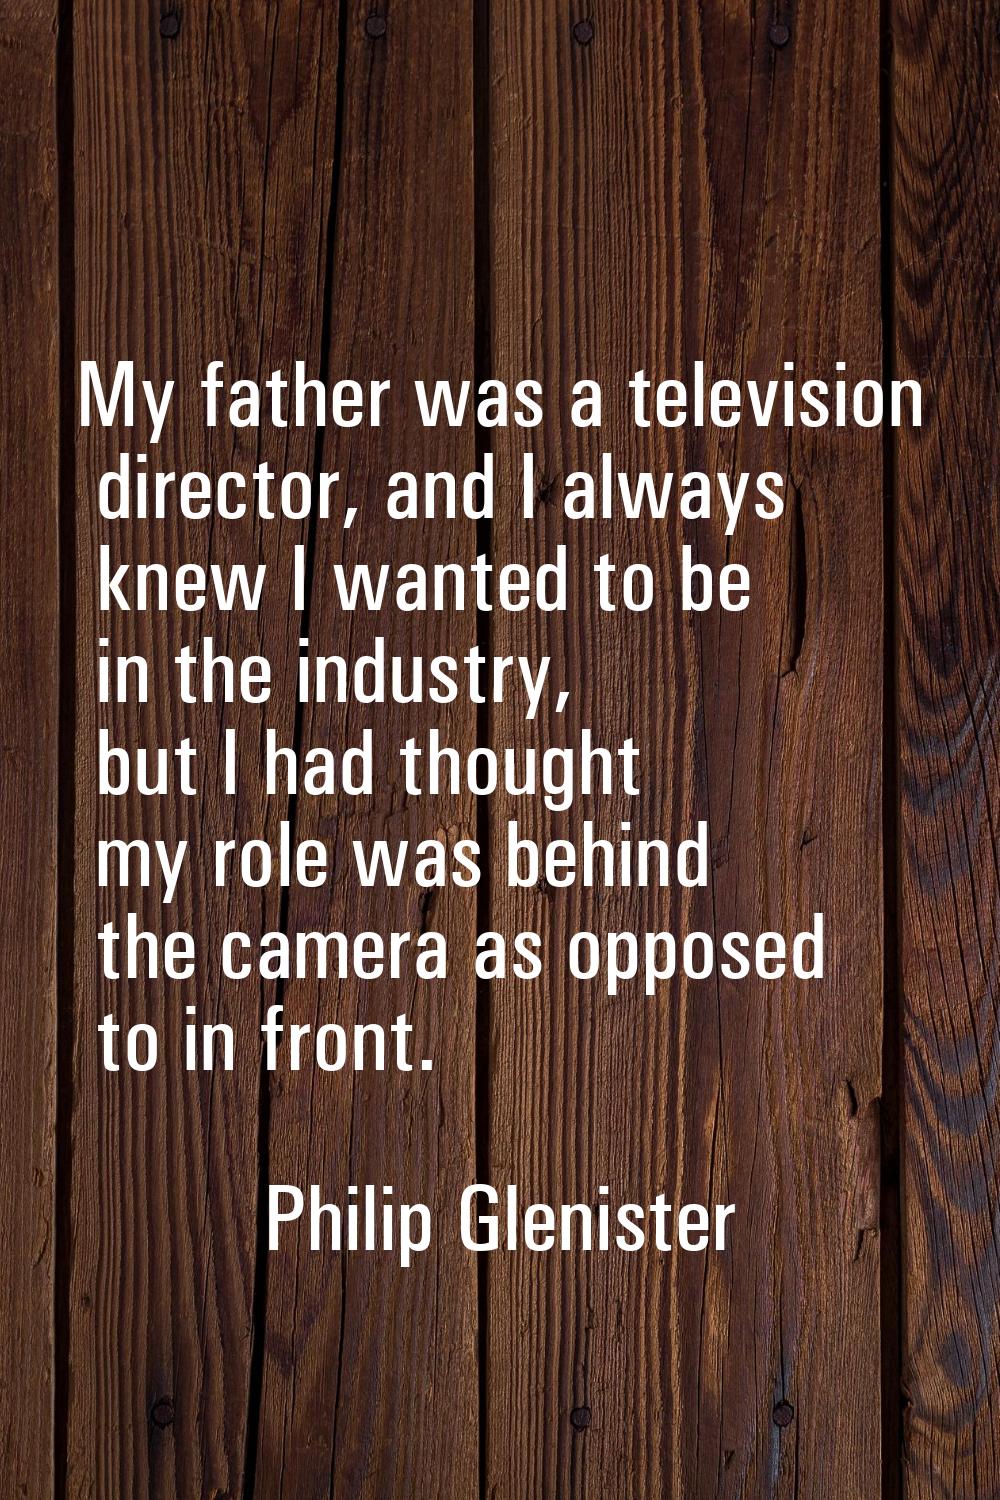 My father was a television director, and I always knew I wanted to be in the industry, but I had th